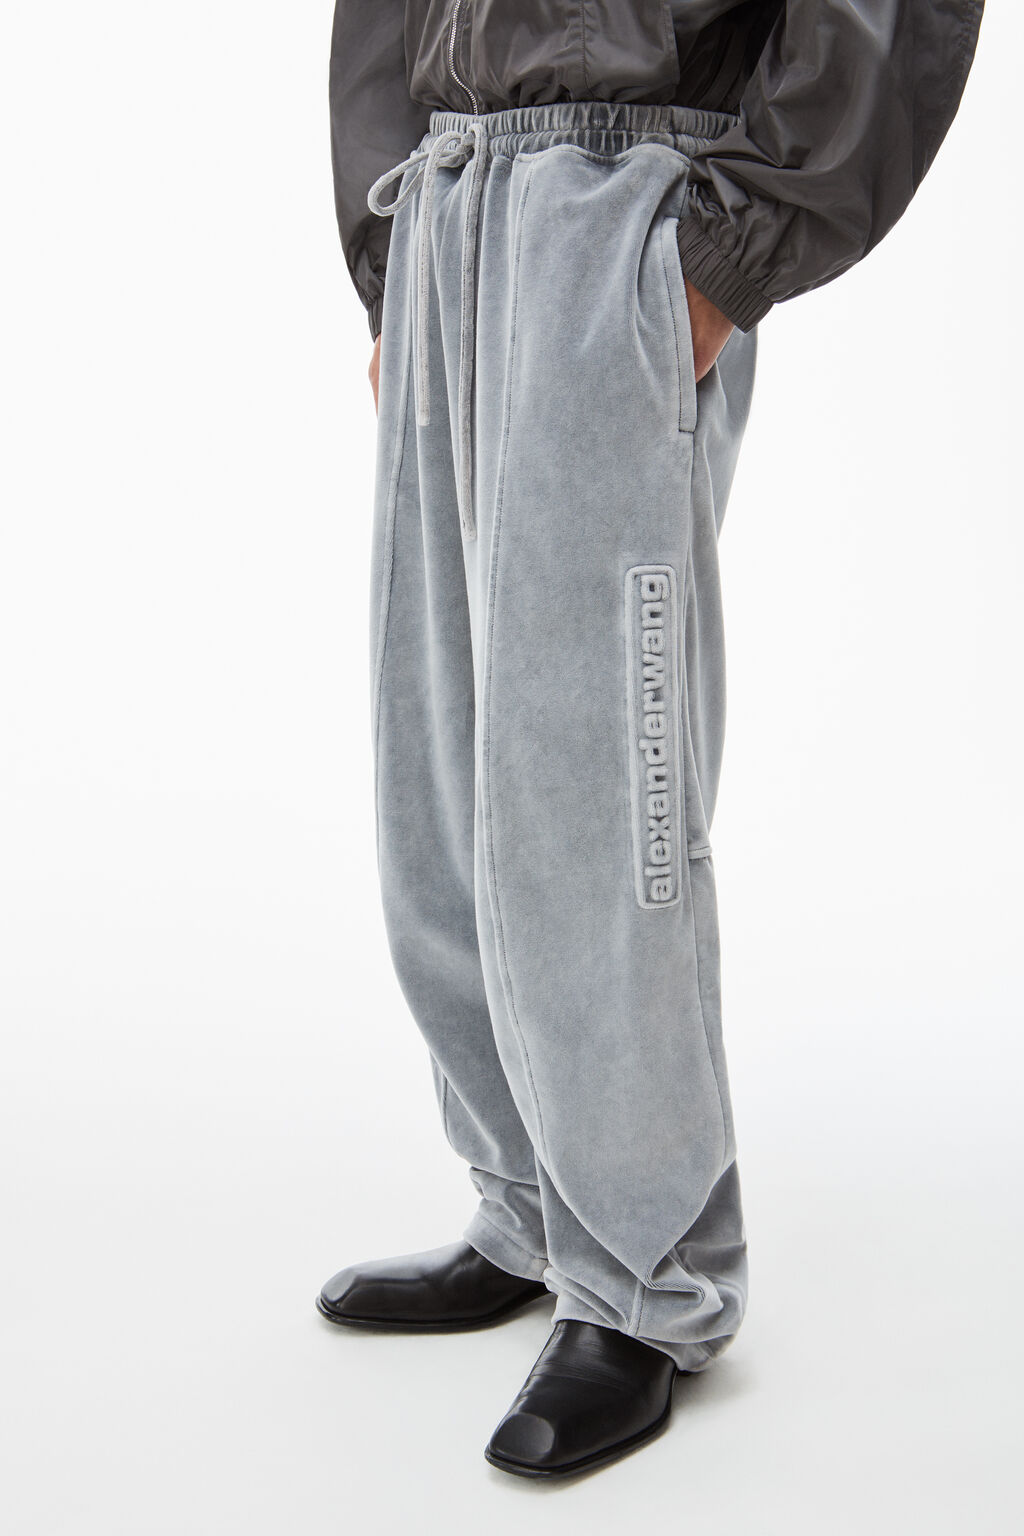 Daily Paper Hacid Sweatpants - Washed Black